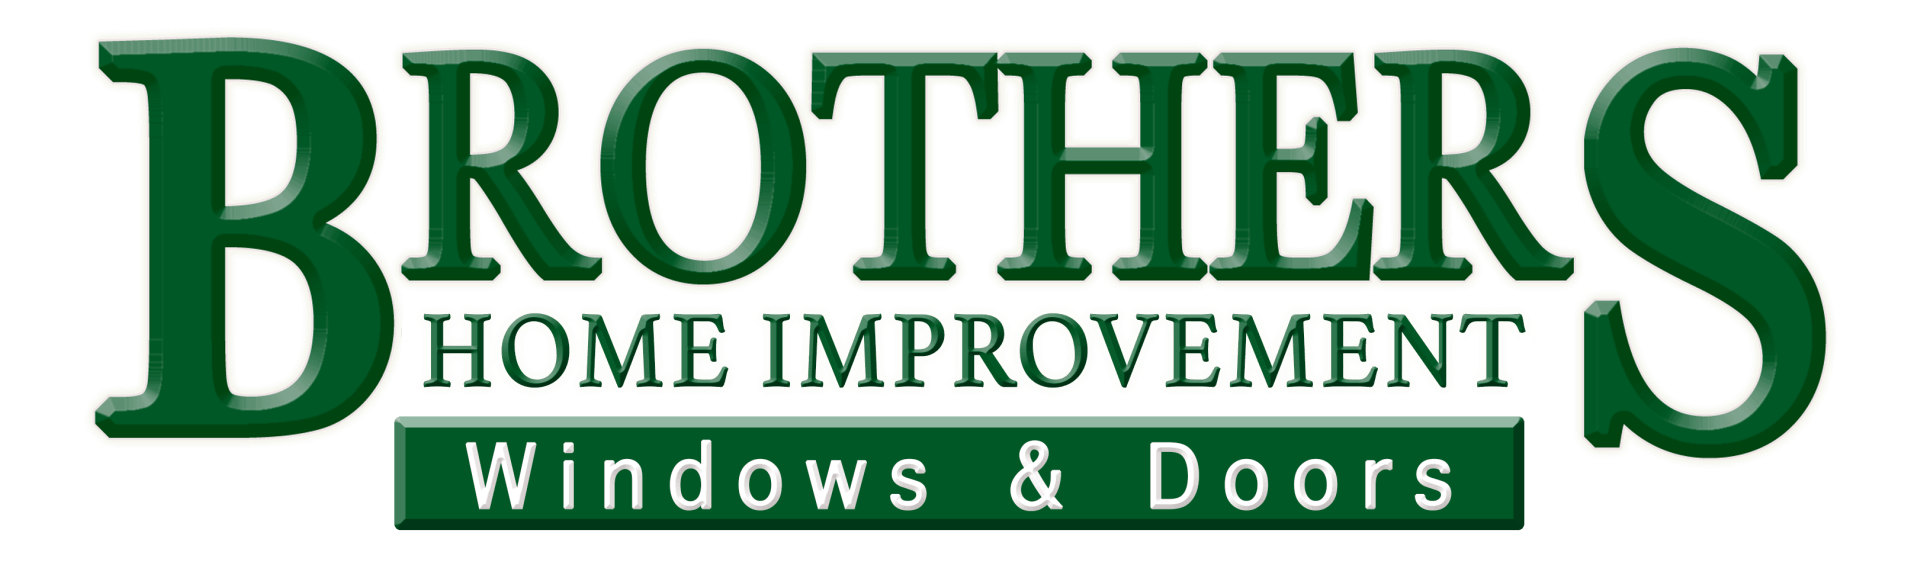 Brothers Home Improvement, Inc.